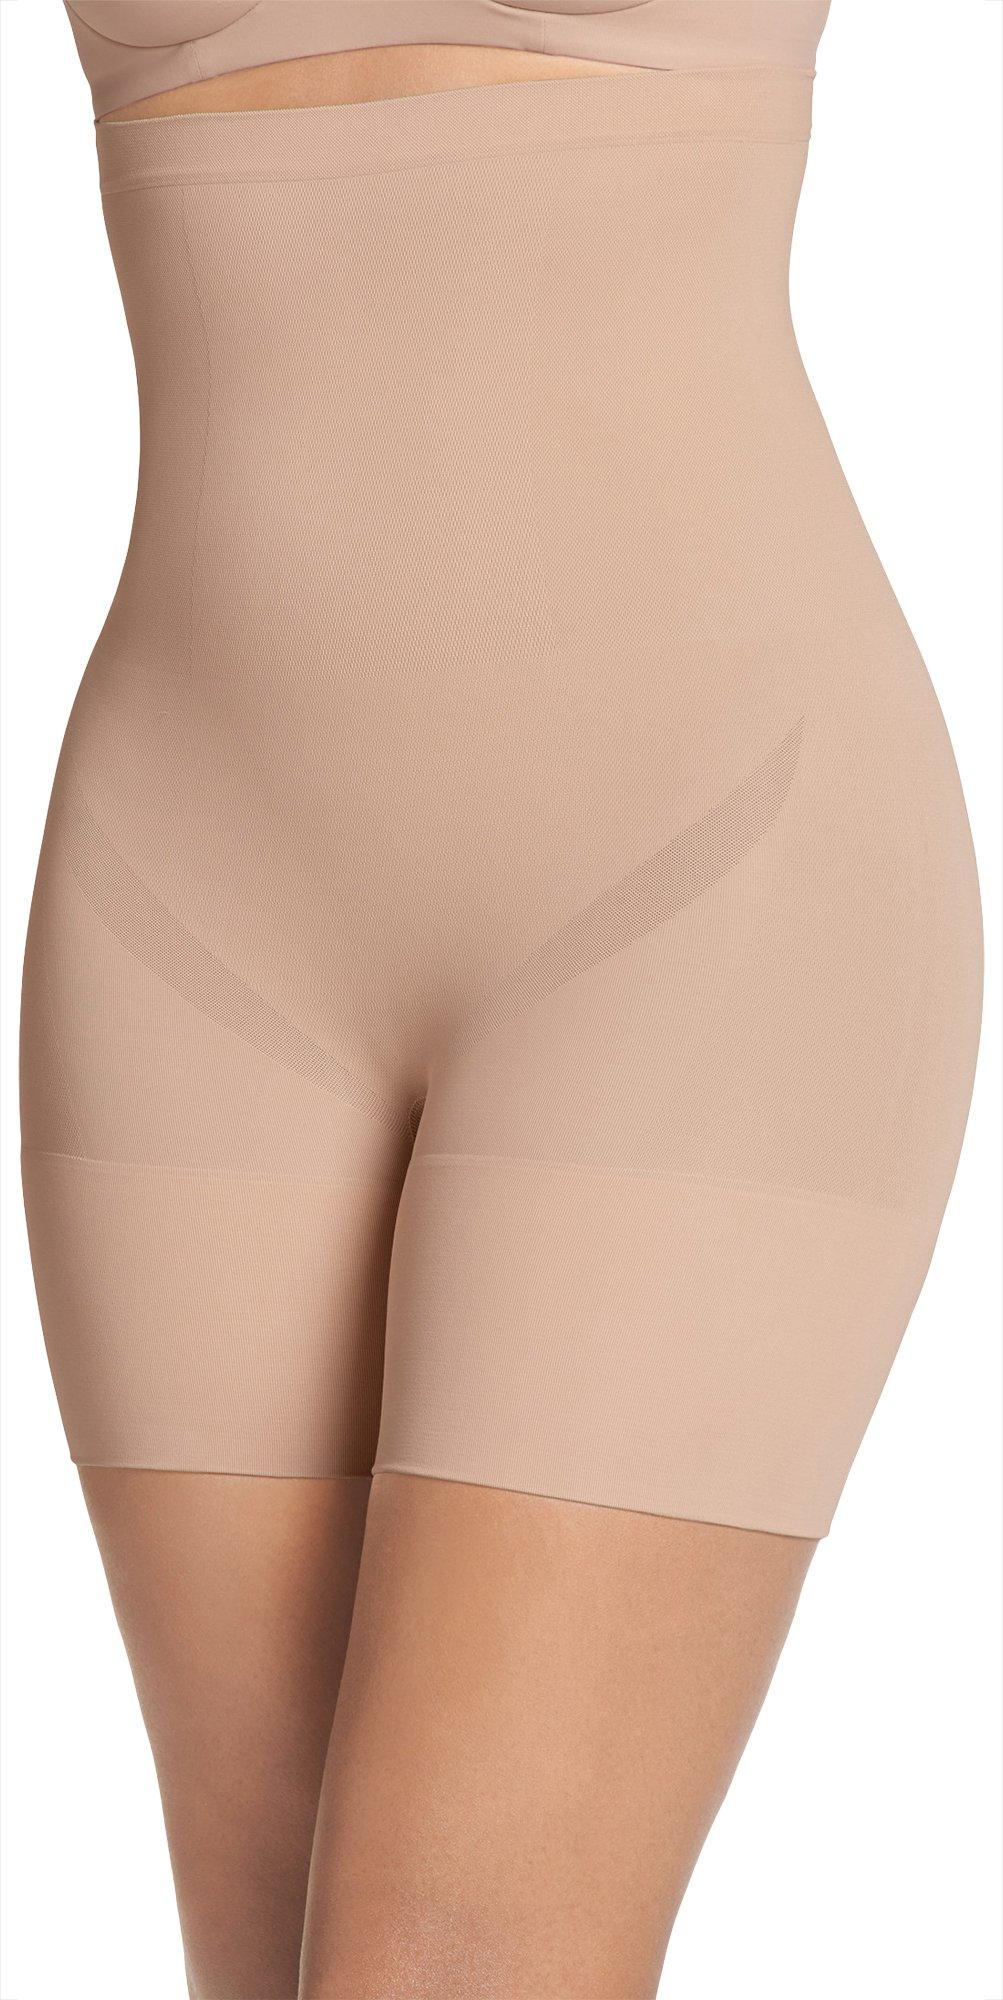 WAIST GIRDLE CLASSIC - Galess Shapers